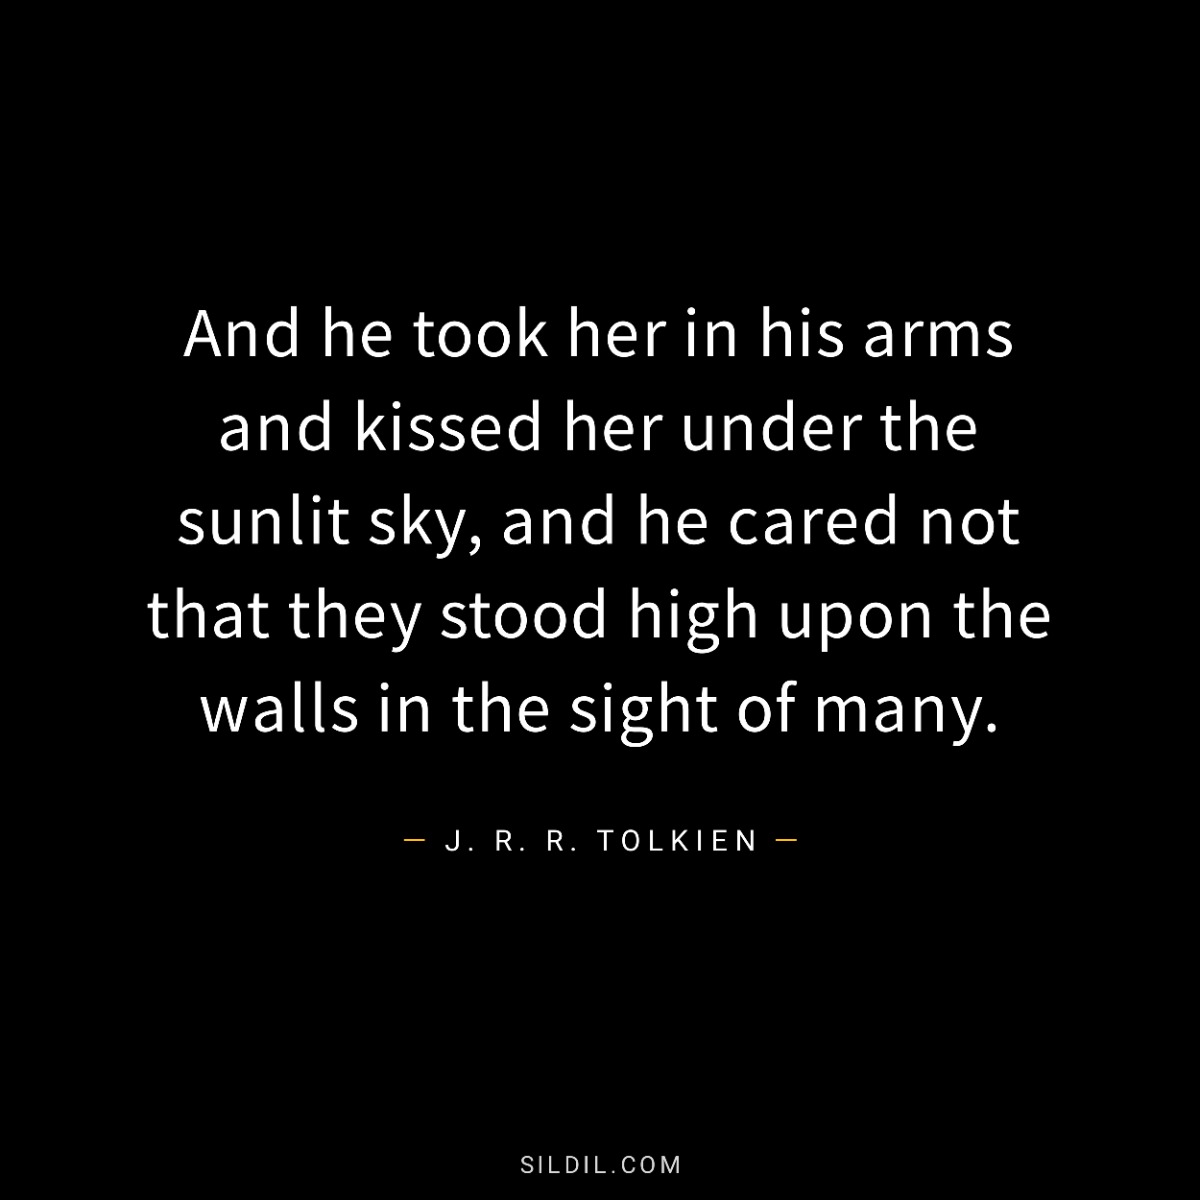 And he took her in his arms and kissed her under the sunlit sky, and he cared not that they stood high upon the walls in the sight of many.